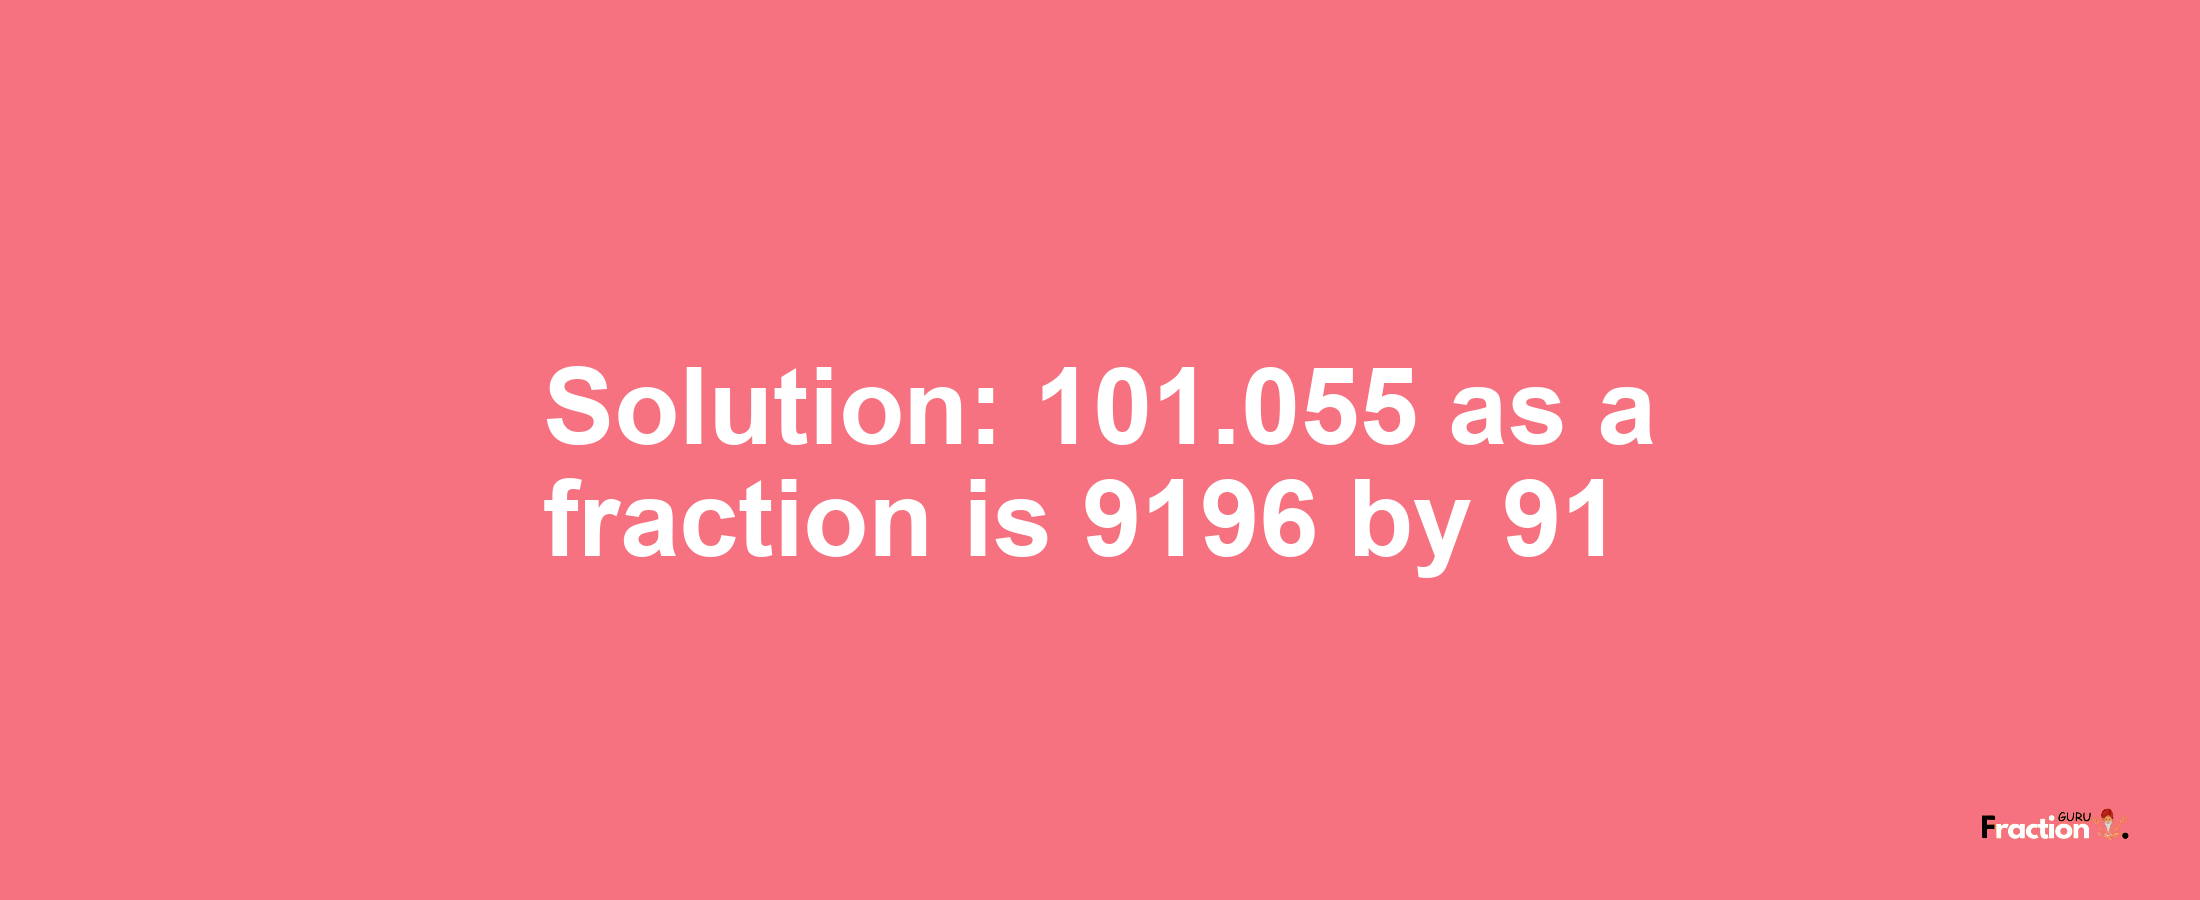 Solution:101.055 as a fraction is 9196/91